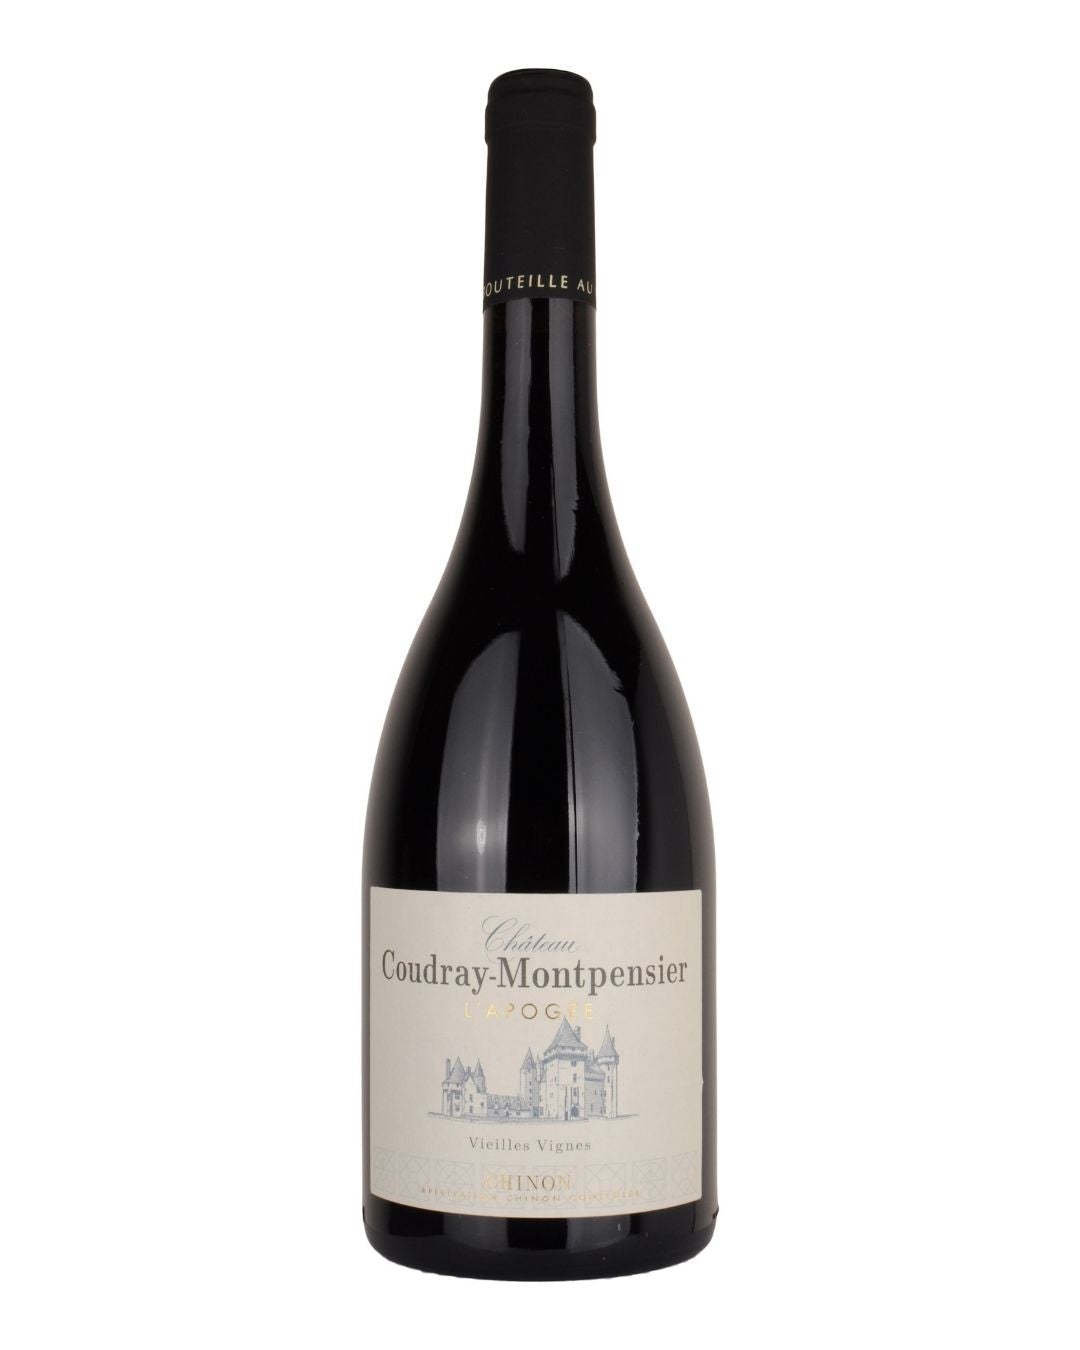 Shop Chateau Coudray-Montpensier Chateau Coudray-Montpensier Chinon l'Apogee Vieilles Vignes 2019 online at PENTICTON artisanal French wine store in Hong Kong. Discover other French wines, promotions, workshops and featured offers at pentictonpacific.com 